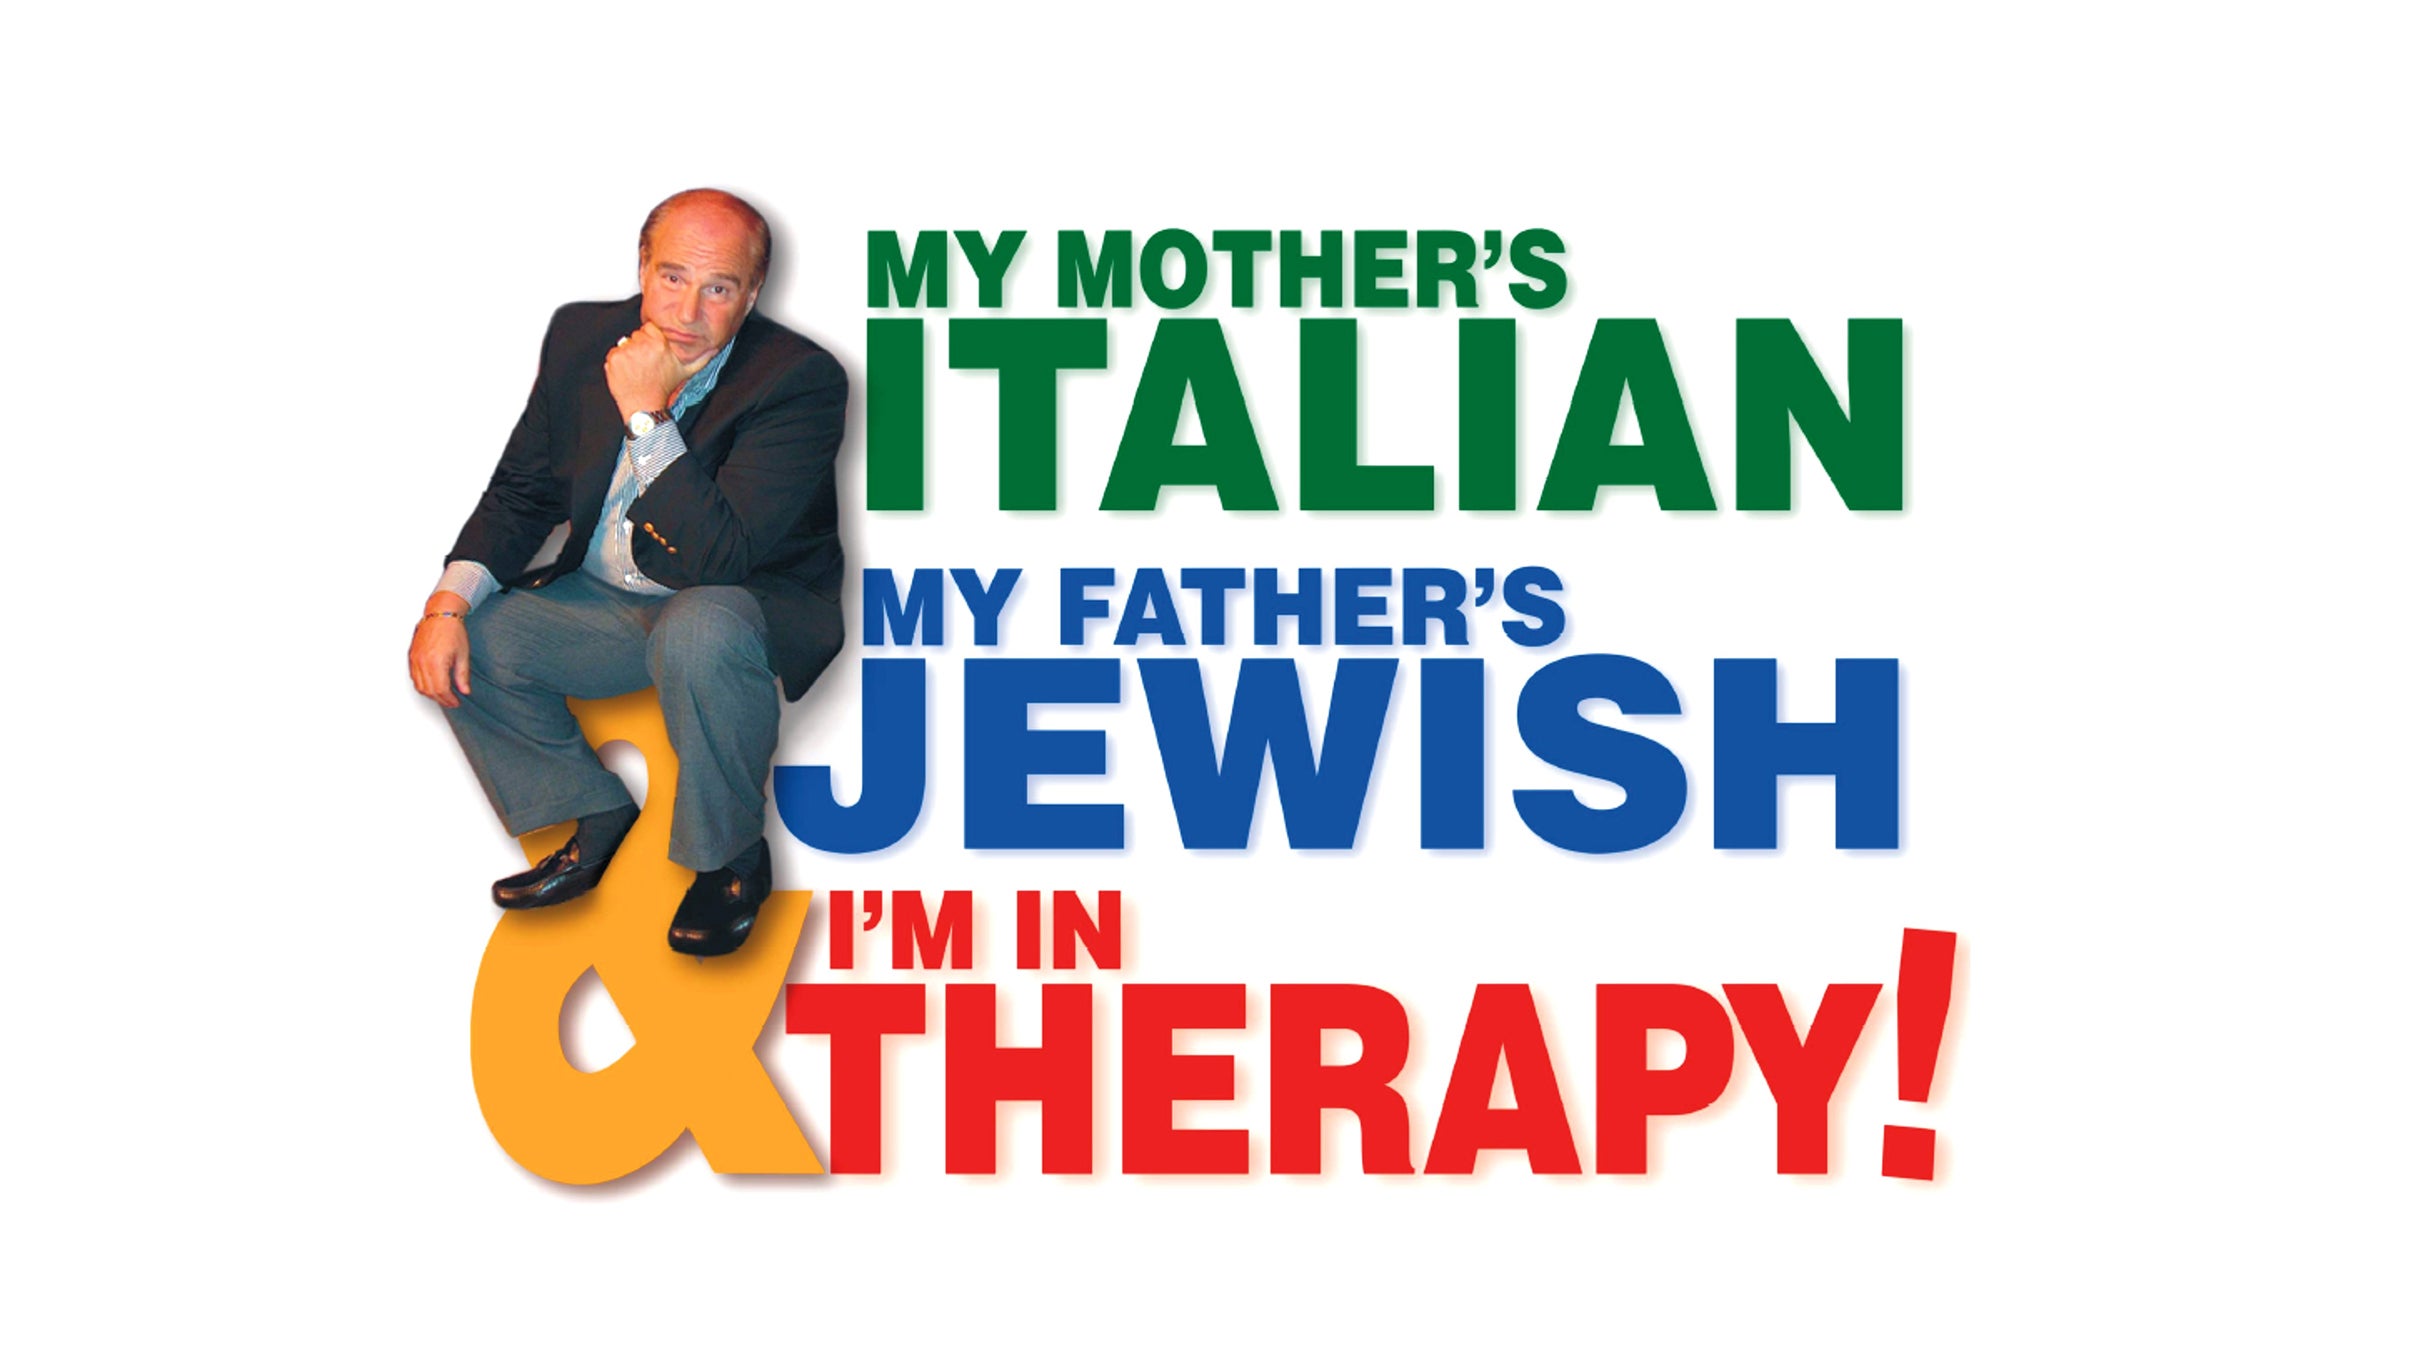 My Mother's Italian, My Father's Jewish and I'm In Therapy